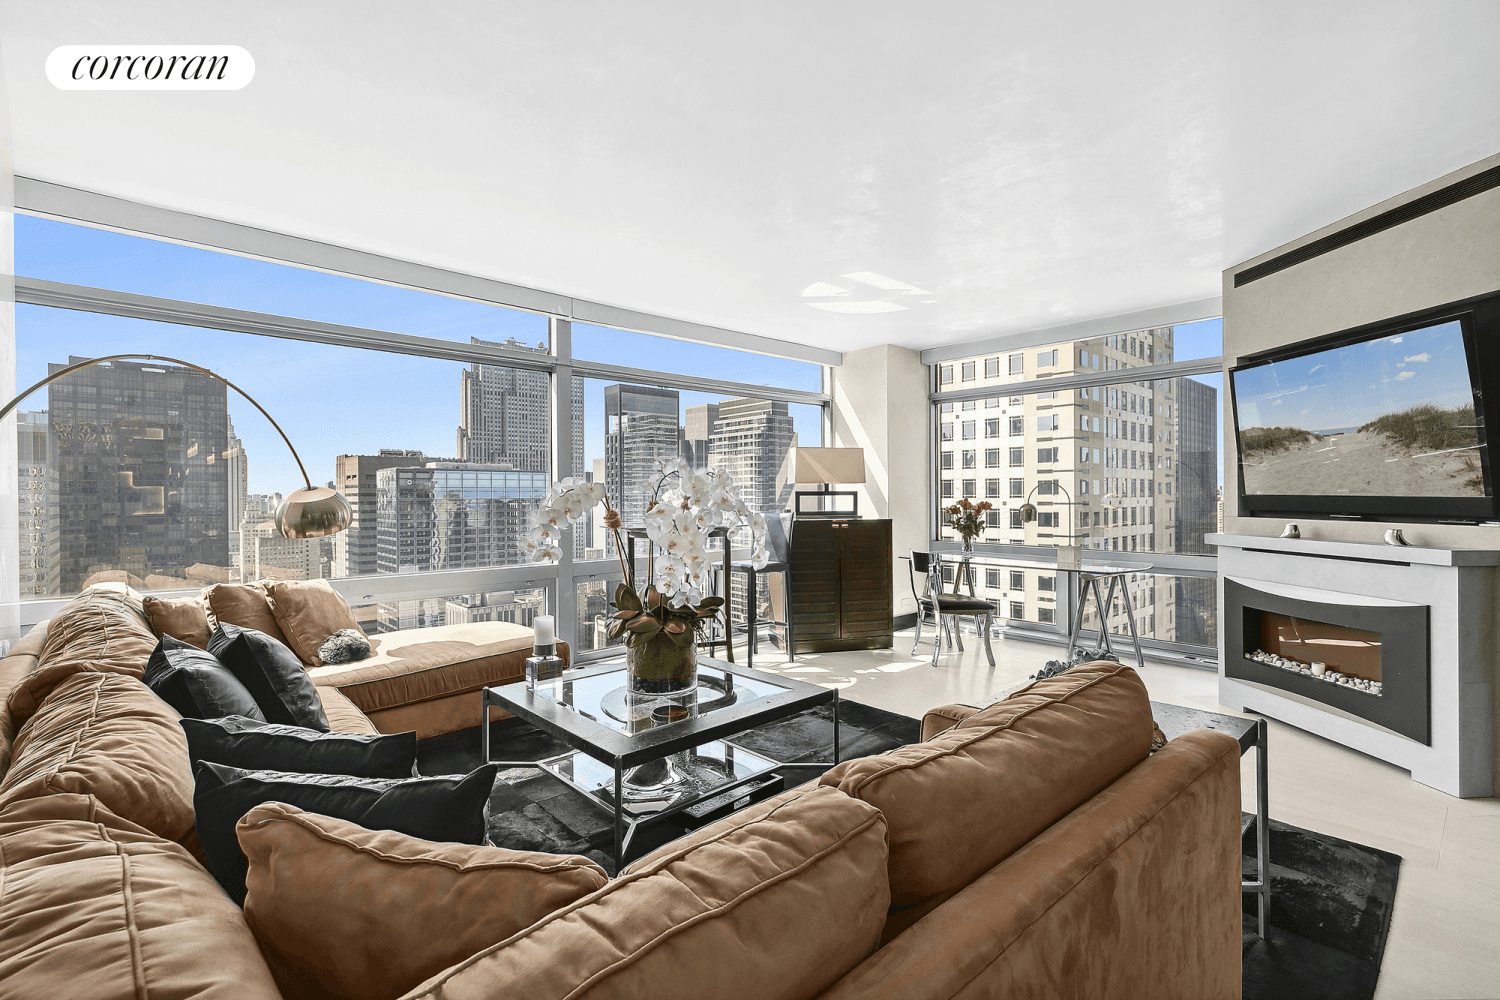 An incredible opportunity to rent this impeccably maintained, south facing fully furnished corner unit at the prized Trump Tower condominium, featuring two bedrooms, two full bathrooms, and a powder room.